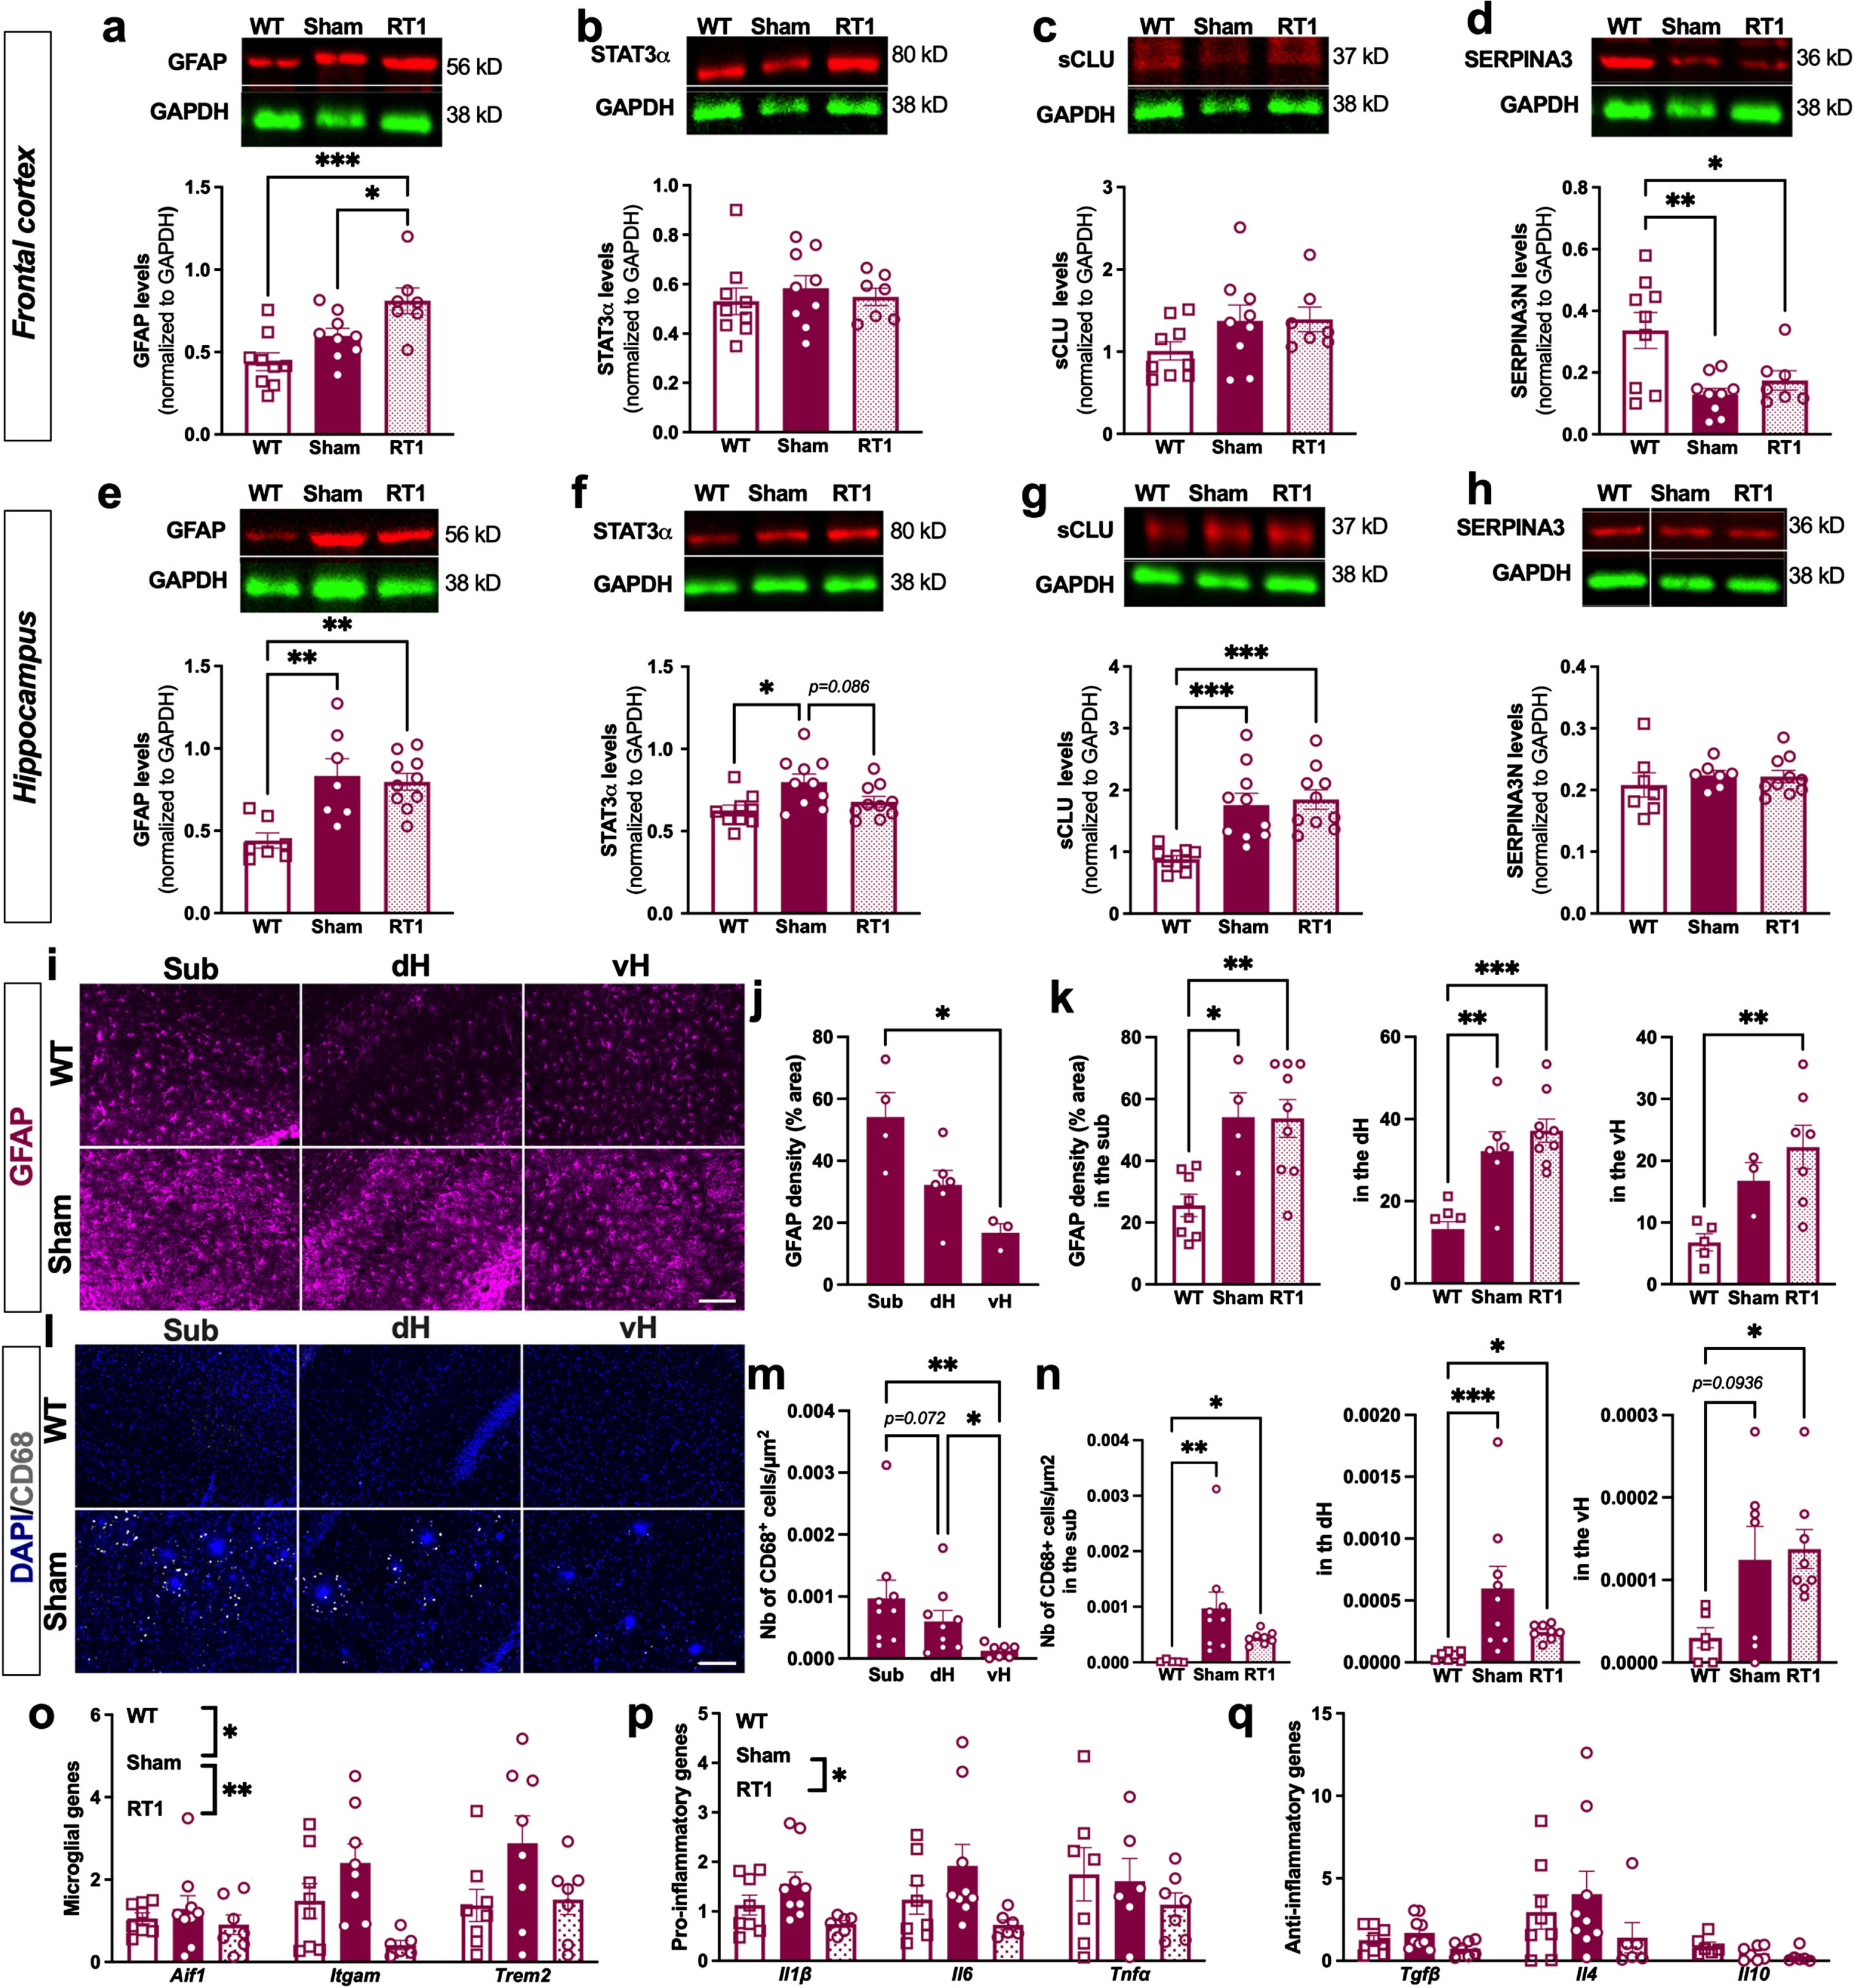 LD-RT reduces microglial inflammation markers in early AD females. Quantification of astrocytic markers including GFAP (a), STAT3α (b), secreted CLUSTERIN (sCLU) (c), and SERPINA3 N (d) levels by western blot in the frontal cortex. Quantification of GFAP (e), STAT3α (f), secreted CLUSTERIN (sCLU) (g), and SERPINA3N (h) levels by western blot in the hippocampus. Data are normalized to GAPDH levels. One-way ANOVA and Tukey’ multiple comparisons test. i) Representative images of GFAP (magenta) staining in the subiculum (sub), dorsal hippocampus (dH) and ventral hippocampus (vH) of WT and sham treated TgAD rats. Scale bar = 100 μm. j) Quantification of the GFAP density (% positively stained area) in the Sub, dH and vH in sham-treated TgAD rats. k) Quantification of the GFAP density (% positively stained area) in the different groups in the sub, dH and vH. l) Representative images of CD68 (grey; merged with DAPI in blue) staining in the sub, dH and vH of WT and sham treated TgAD rats. Scale bar = 100 μm. m) Quantification of the number of CD68+ cells/μm2 in sham-treated TgAD rats. n) Quantification of the number of CD68+ cells/μm2 in the different groups in the sub, dH and vH. One-way ANOVA and Tukey’s multiple comparisons test or Kruskal-Wallis and Dunn’s multiple comparisons test. (o–q) mRNA levels quantified by qPCR in the cortex of animals. Two-way ANOVA (group and gene as between factors) and Tukey’s multiple comparisons test. # or *p < 0.05, **p < 0.01, ***p < 0.001.